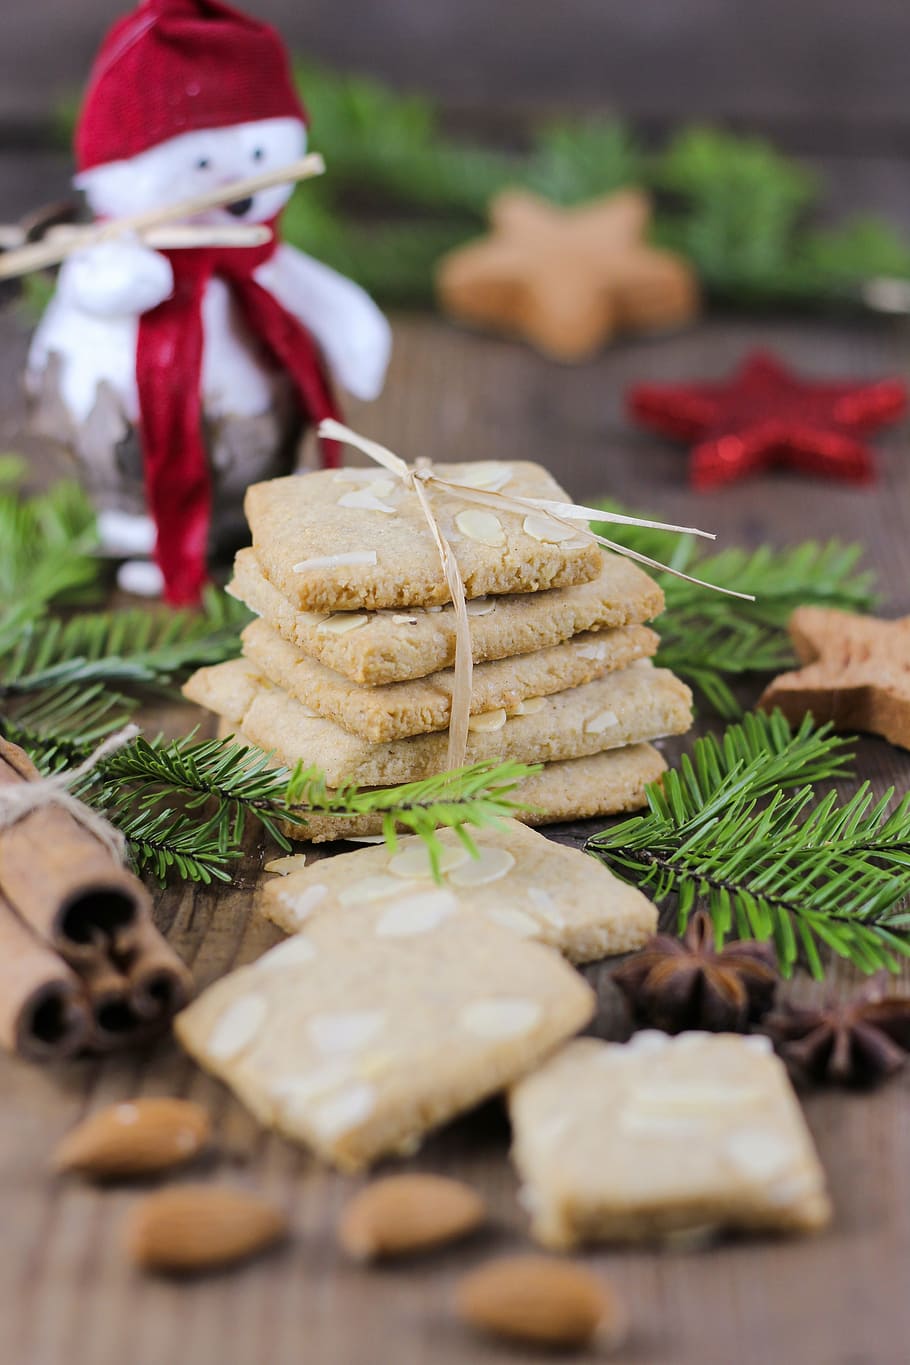 biscuit with tie, advent, cookies, speculaas, christmas, small cakes, bake, self-made, bakery, almonds